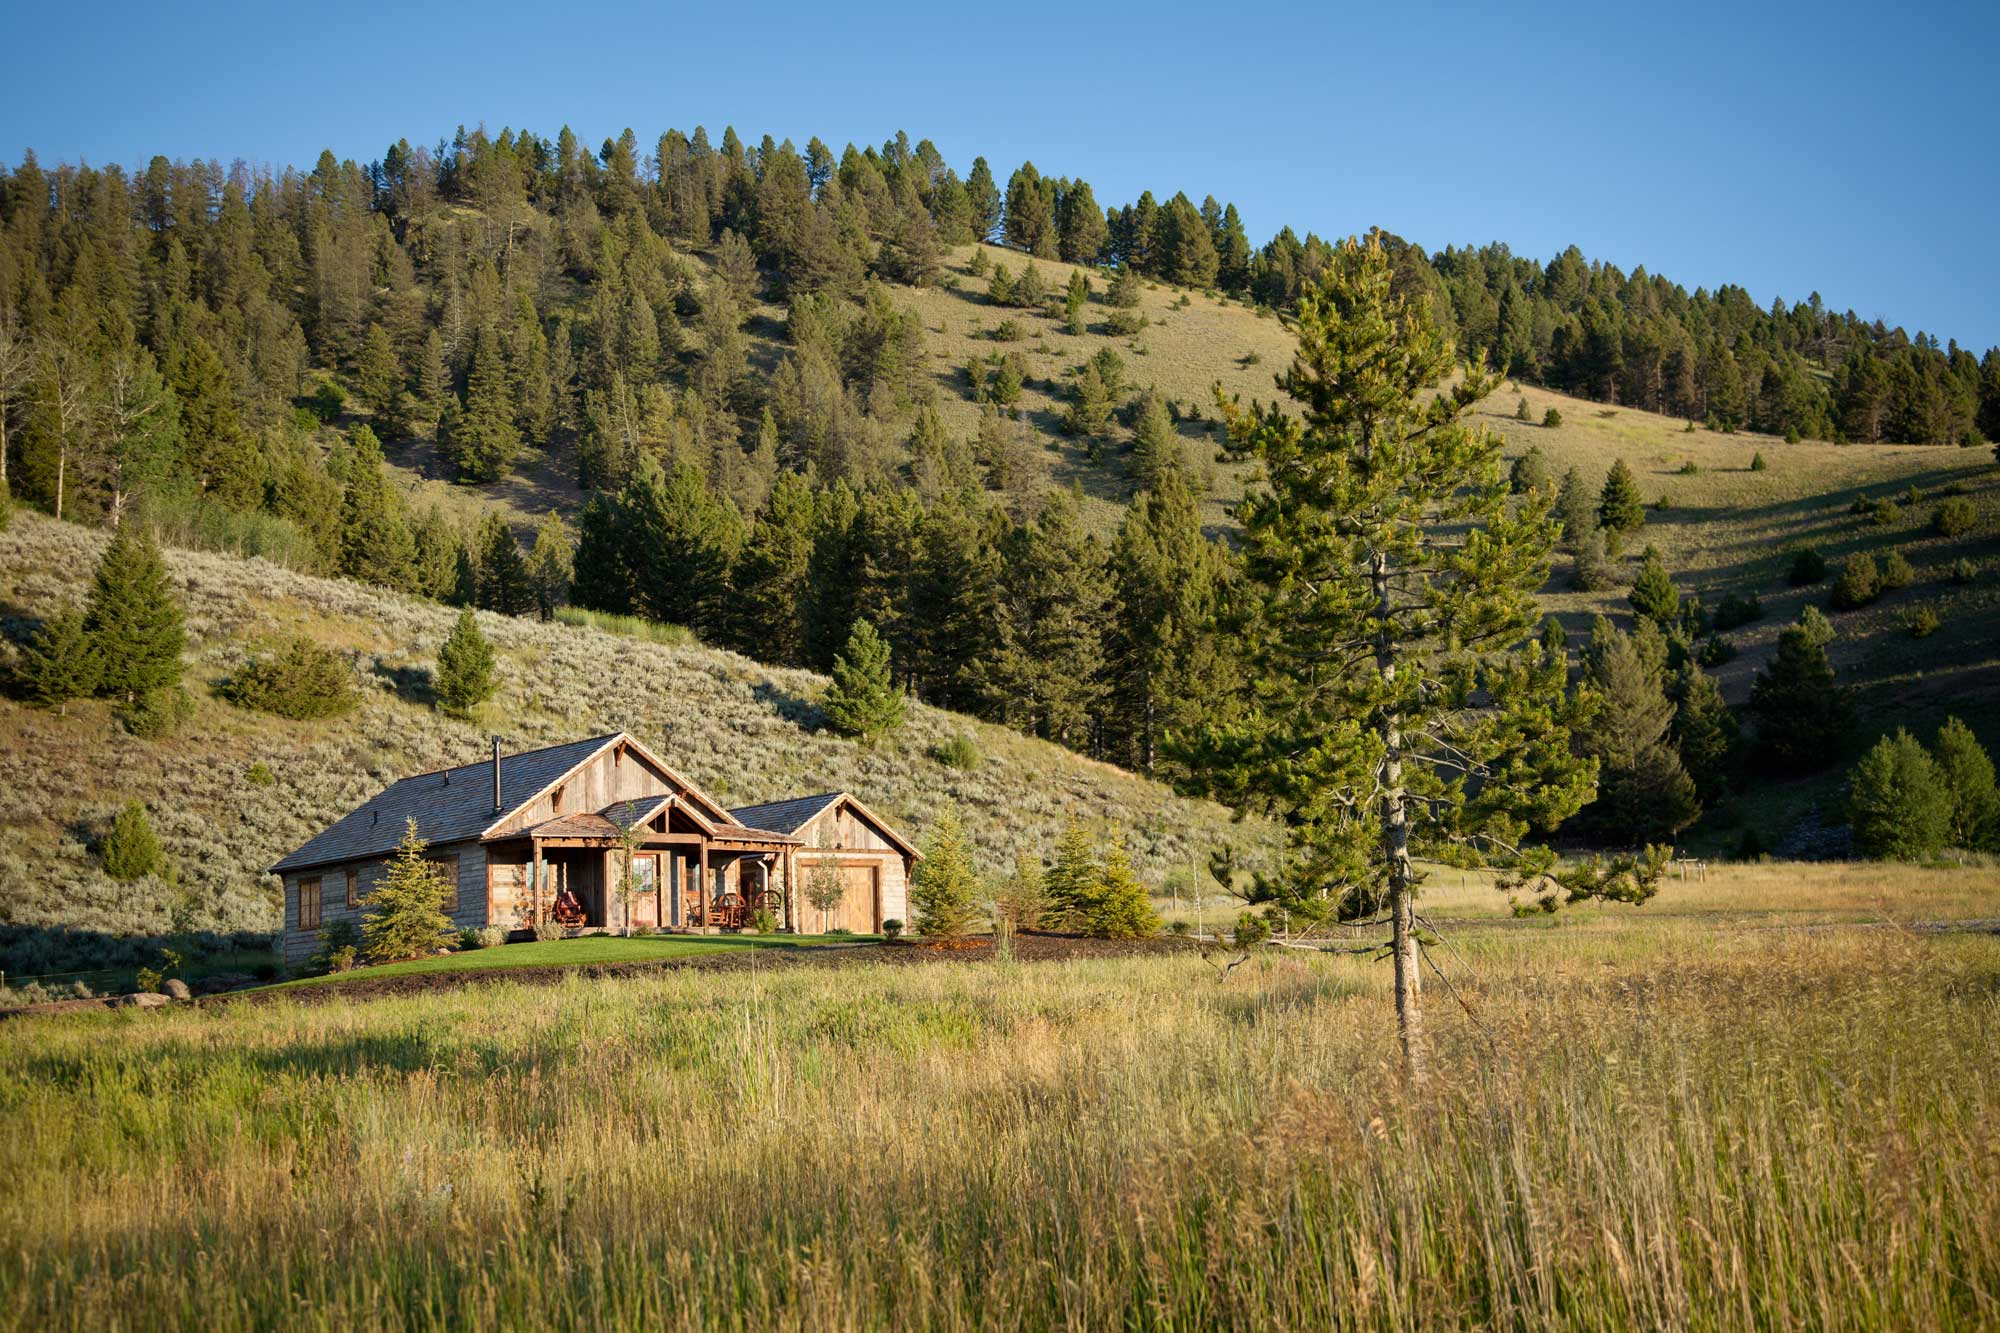 Best All-Inclusive Resorts in United States | All-Inclusives USA America | Destination Weddings | All-Inclusive Honeymoons  | The Ranch at Rock Creek, Phillipsburg, Montana